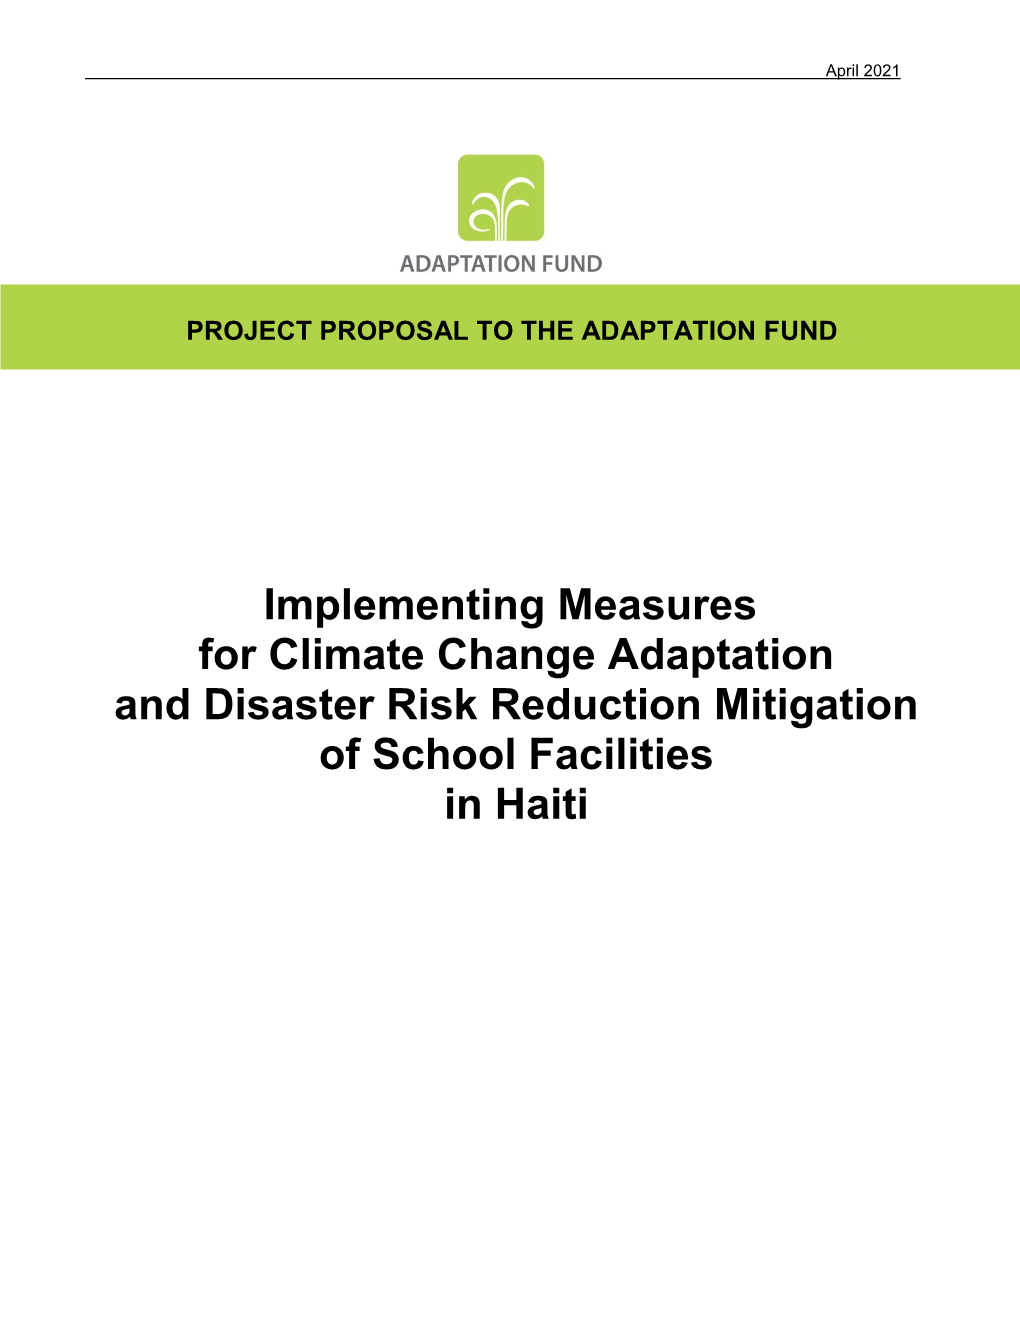 Implementing Measures for Climate Change Adaptation and Disaster Risk Reduction Mitigation of School Facilities in Haiti